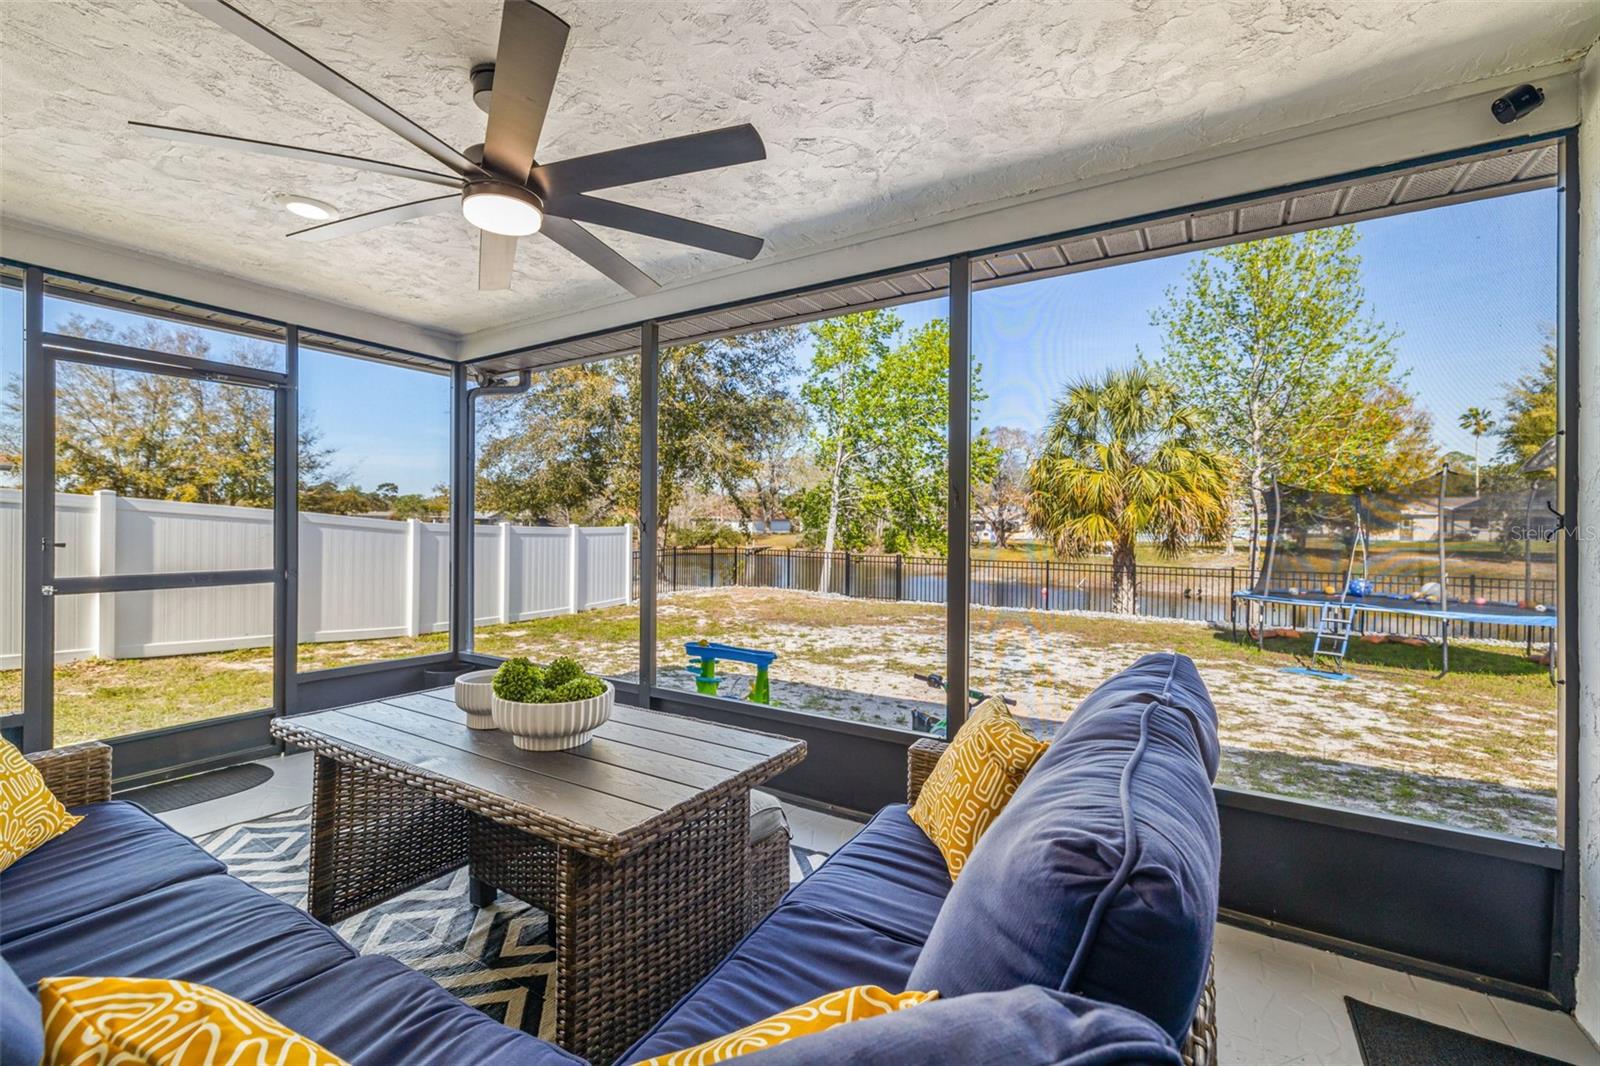 Enjoy the pond view from your screened in lanai with fresh screens and a new ceiling fan! Perfect place for that morning cup of coffee or evening glass of wine!